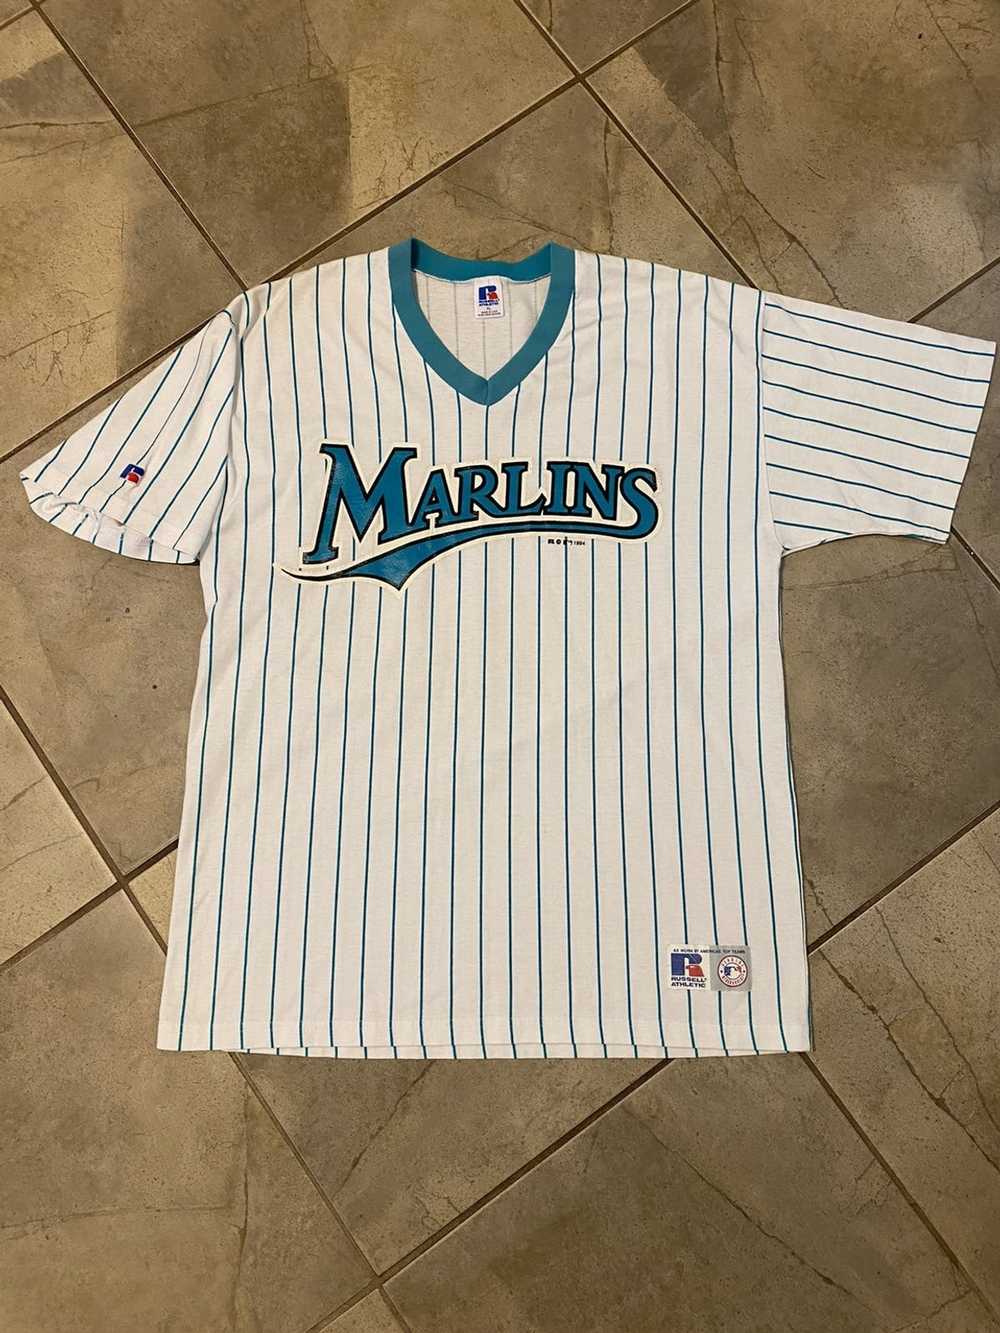 Florida Marlins West #97 Game Used White Jersey 50 DP14301